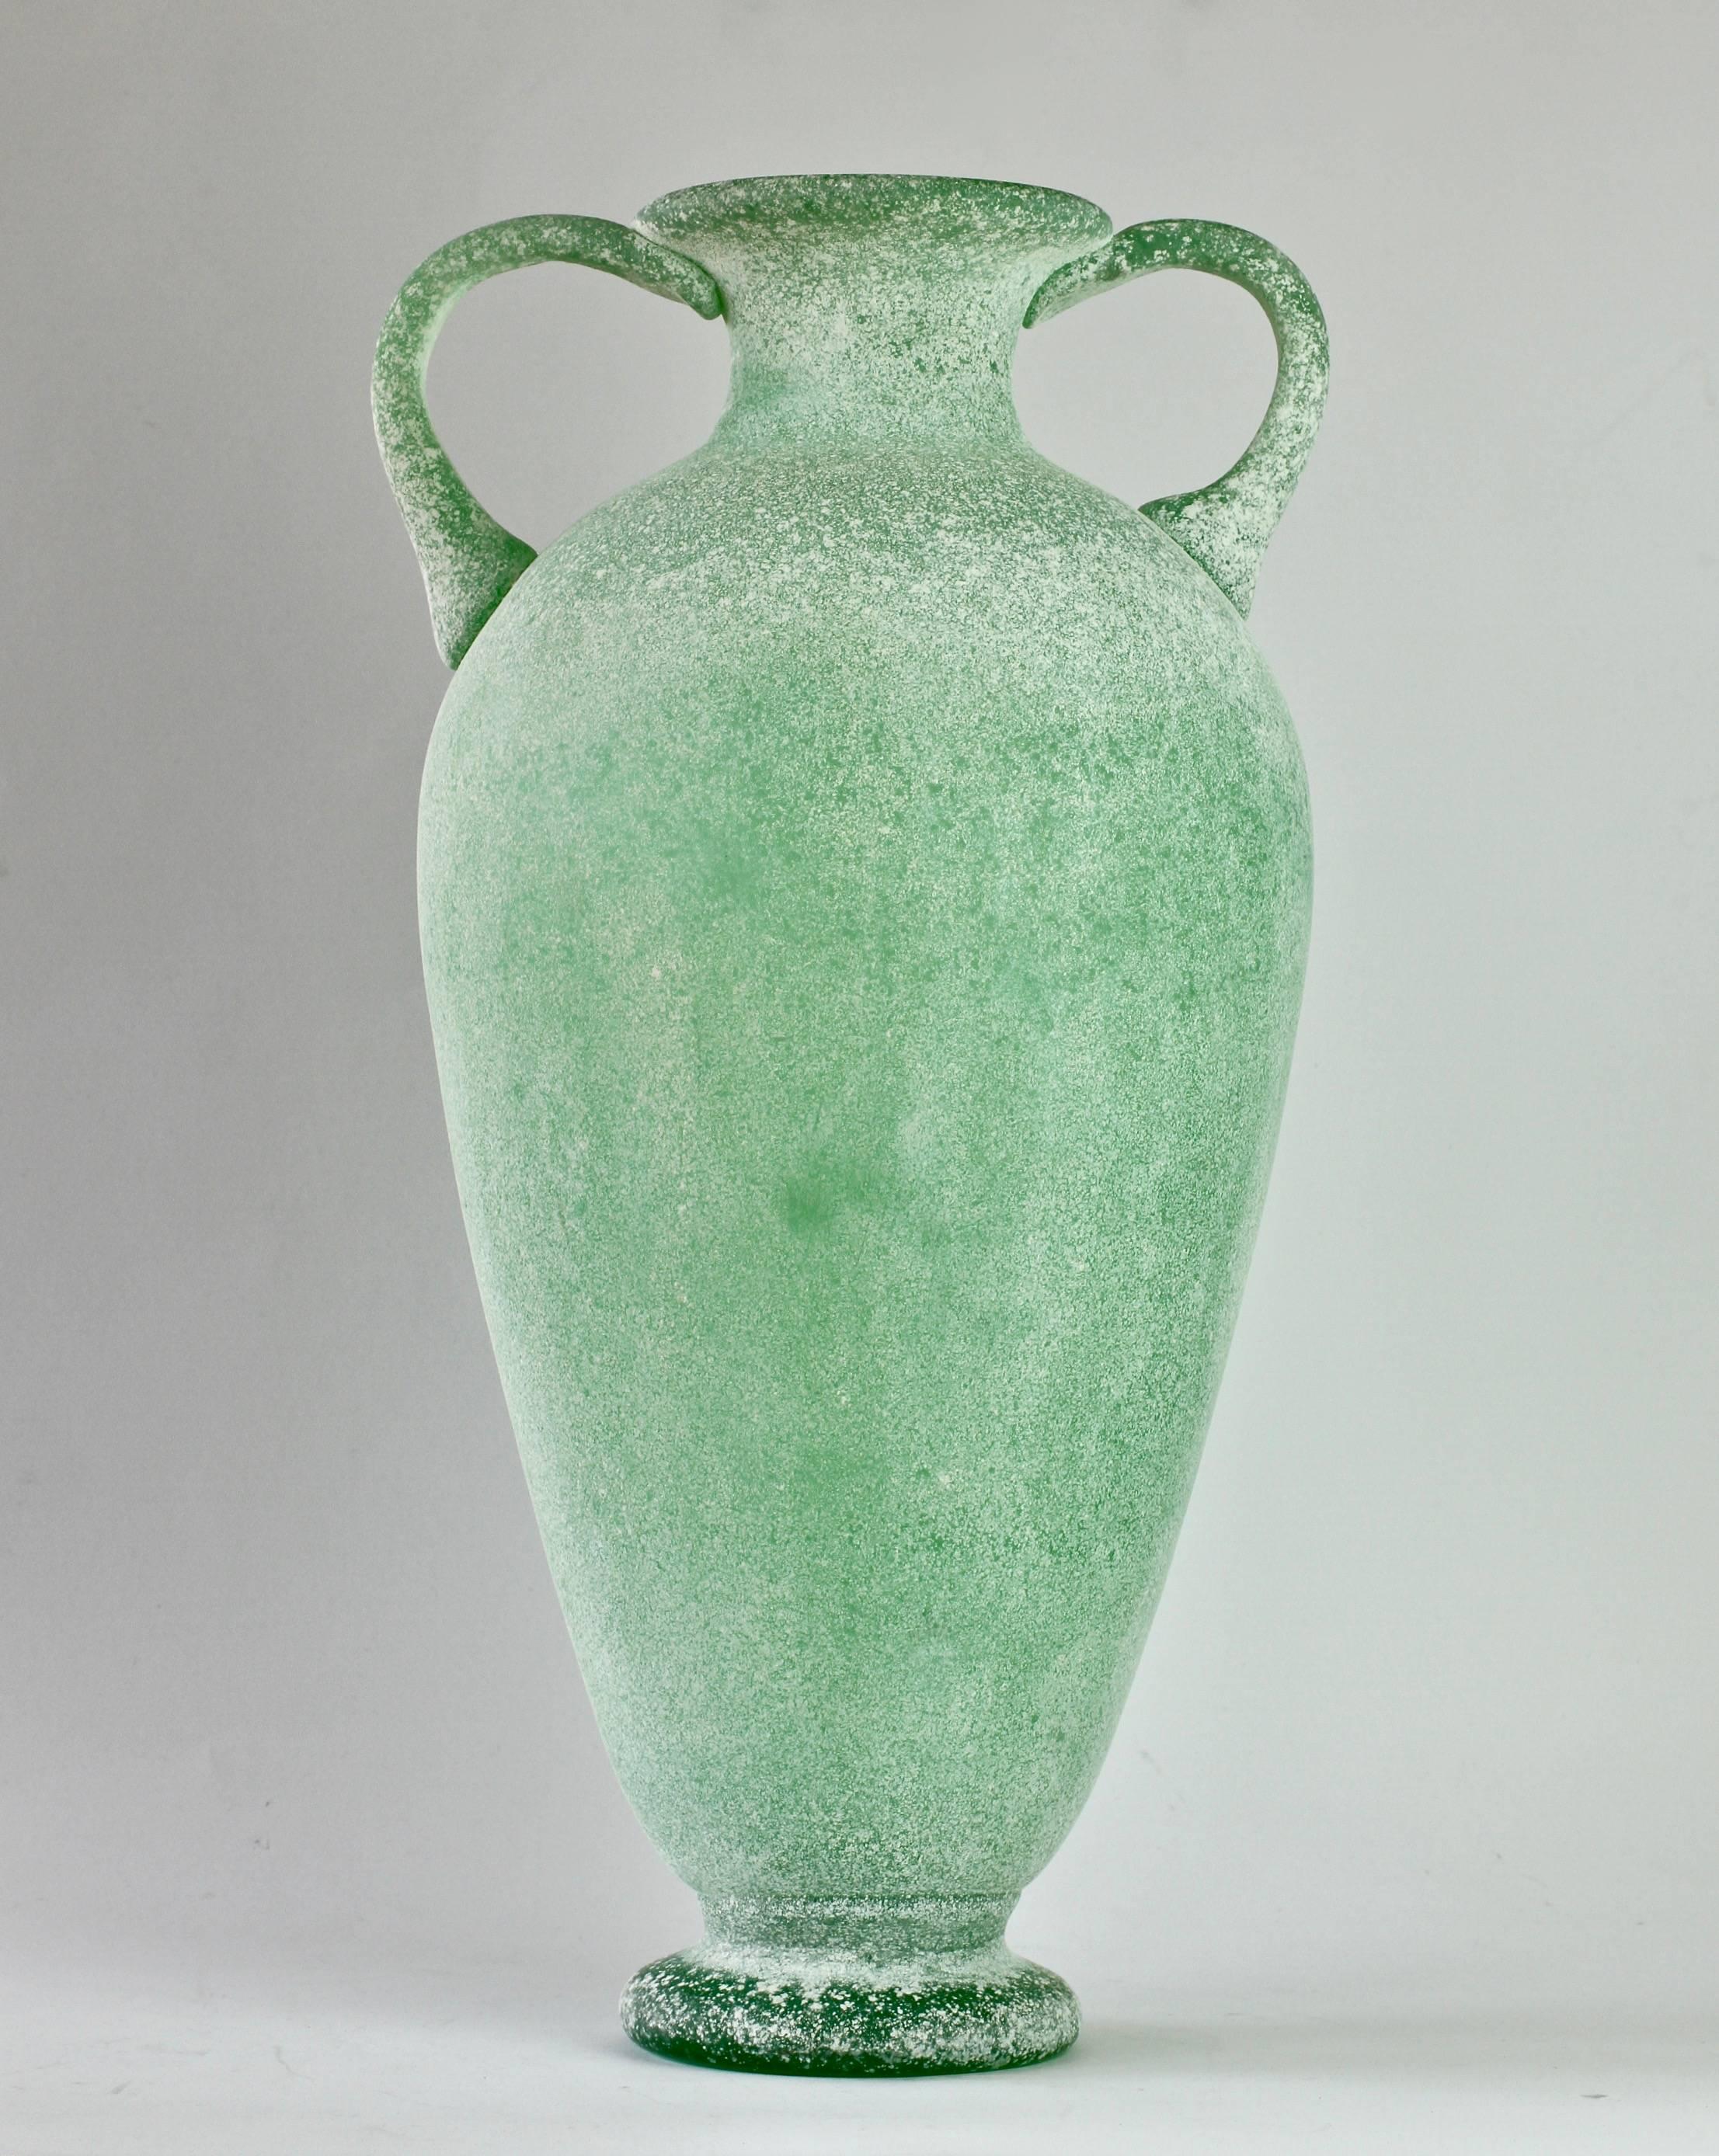 Monumental 18 inch tall 'a Scavo' green colored / coloured glass amphora or vase attributed to Seguso Vetri d'Arte Murano, Italy. Elegant in form and showing extraordinary craftmanship with the use of the 'Scavo' technique to replicate to look and